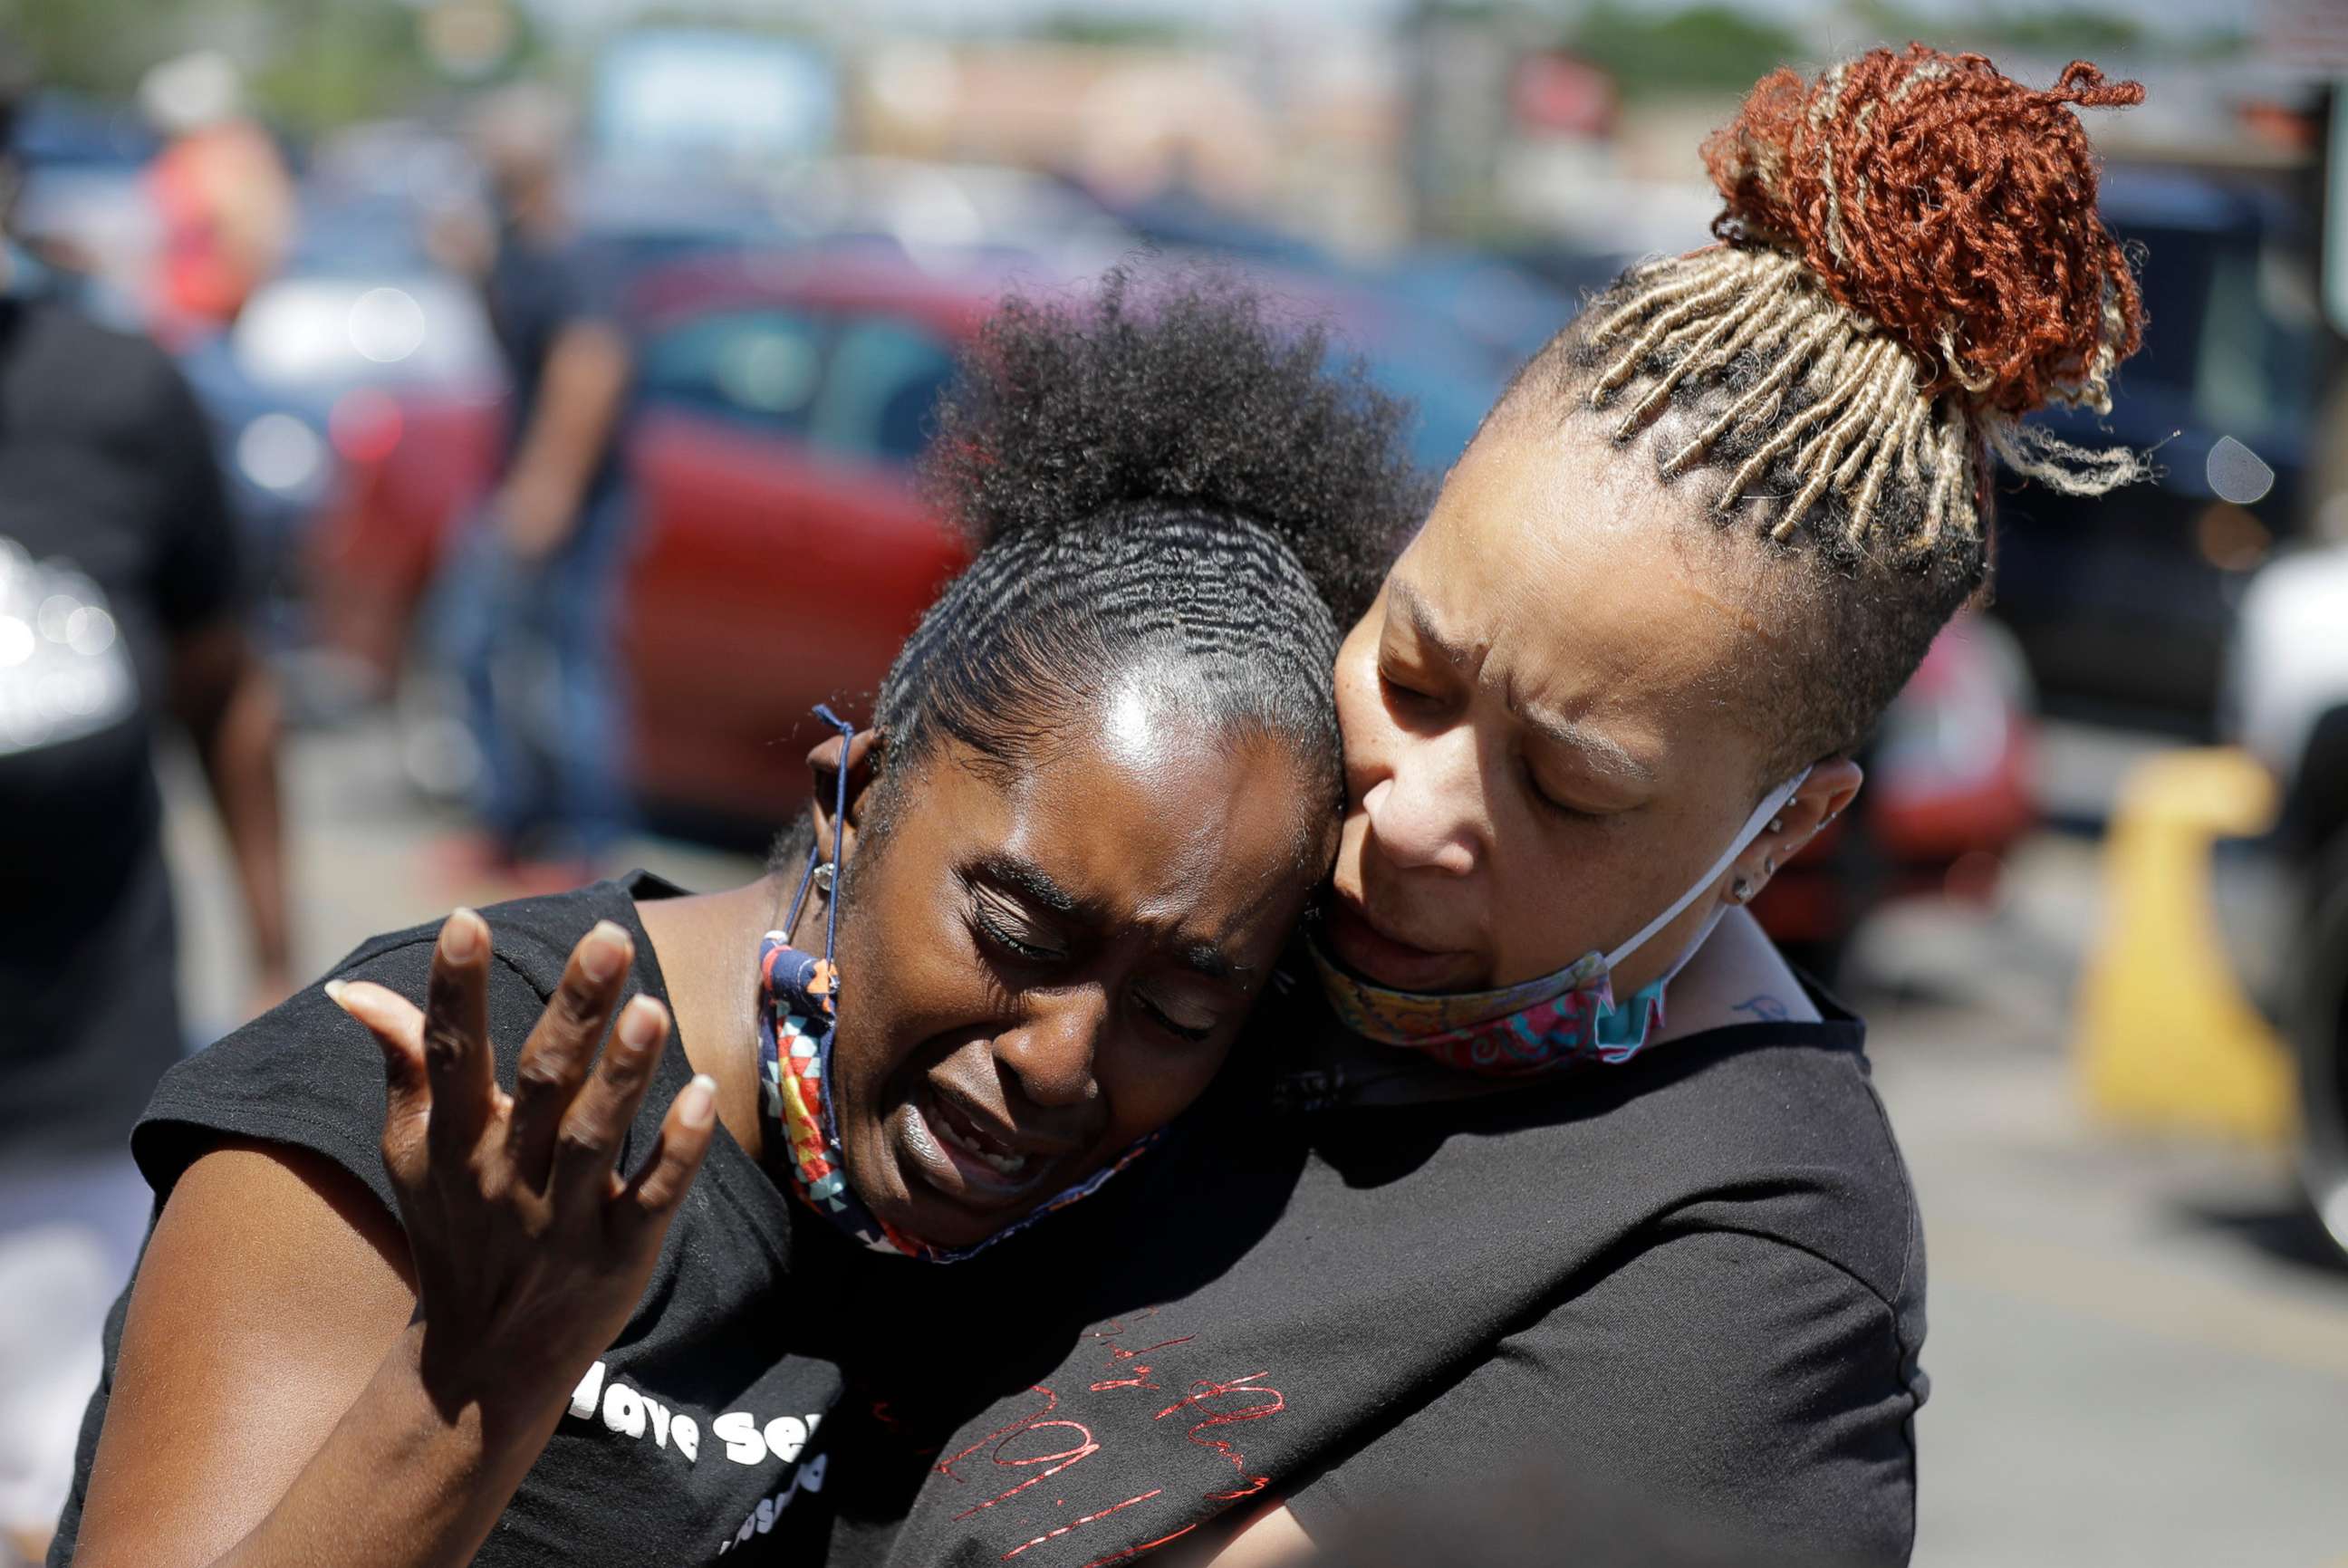 PHOTO: Two women pray, June 2, 2020, in Louisville, Ky., near the intersection where David McAtee was killed Sunday evening.